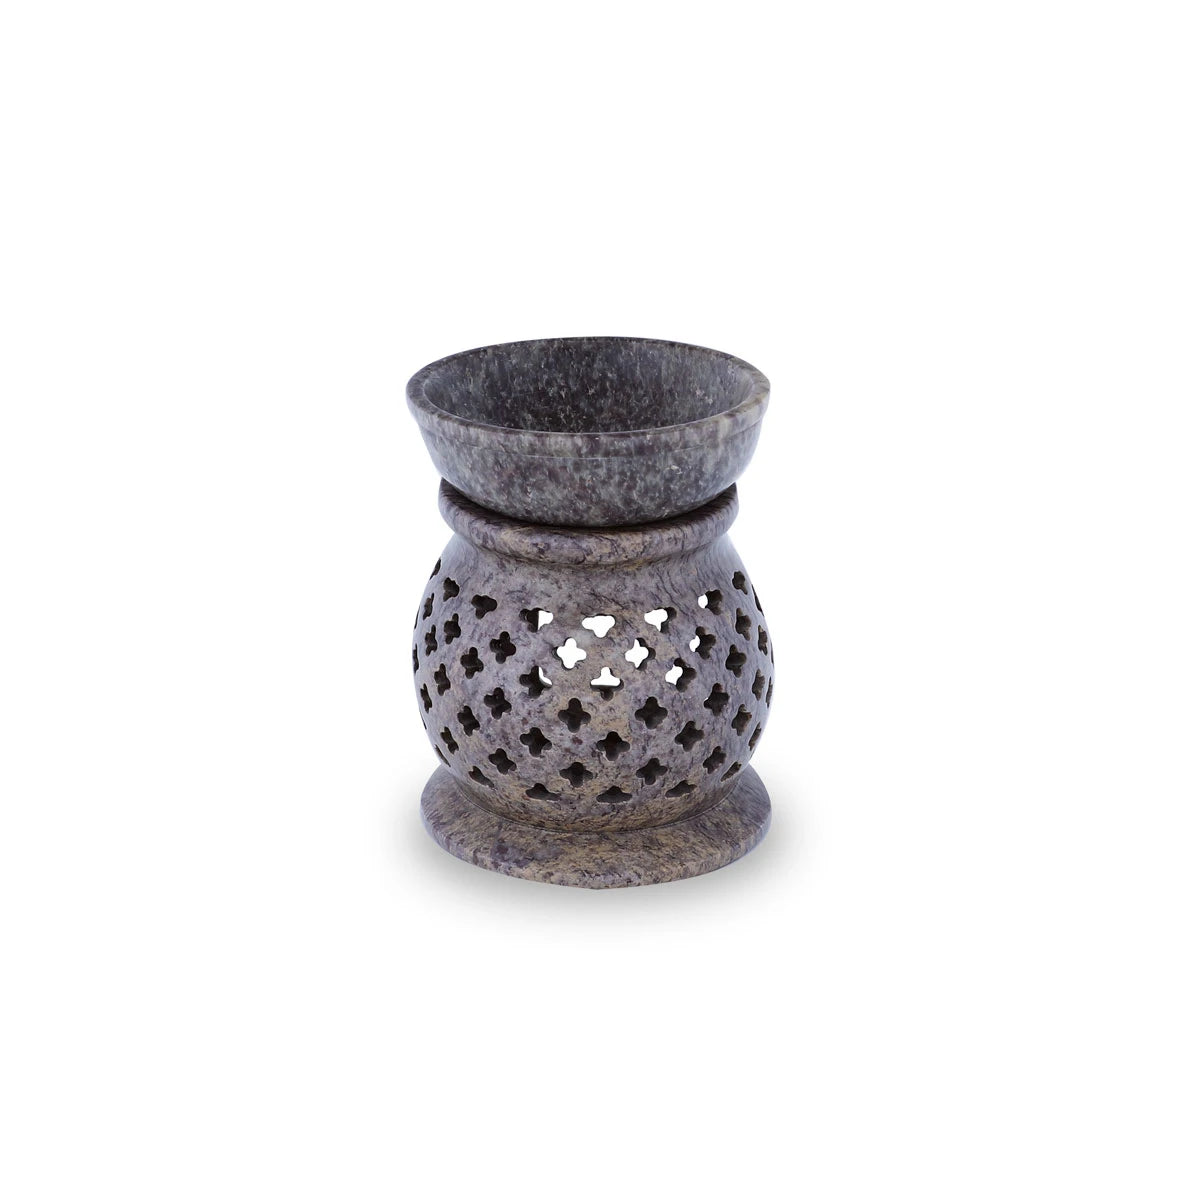 Back View of Ceramic Stone Oil Burner with Clover Shape Perforations